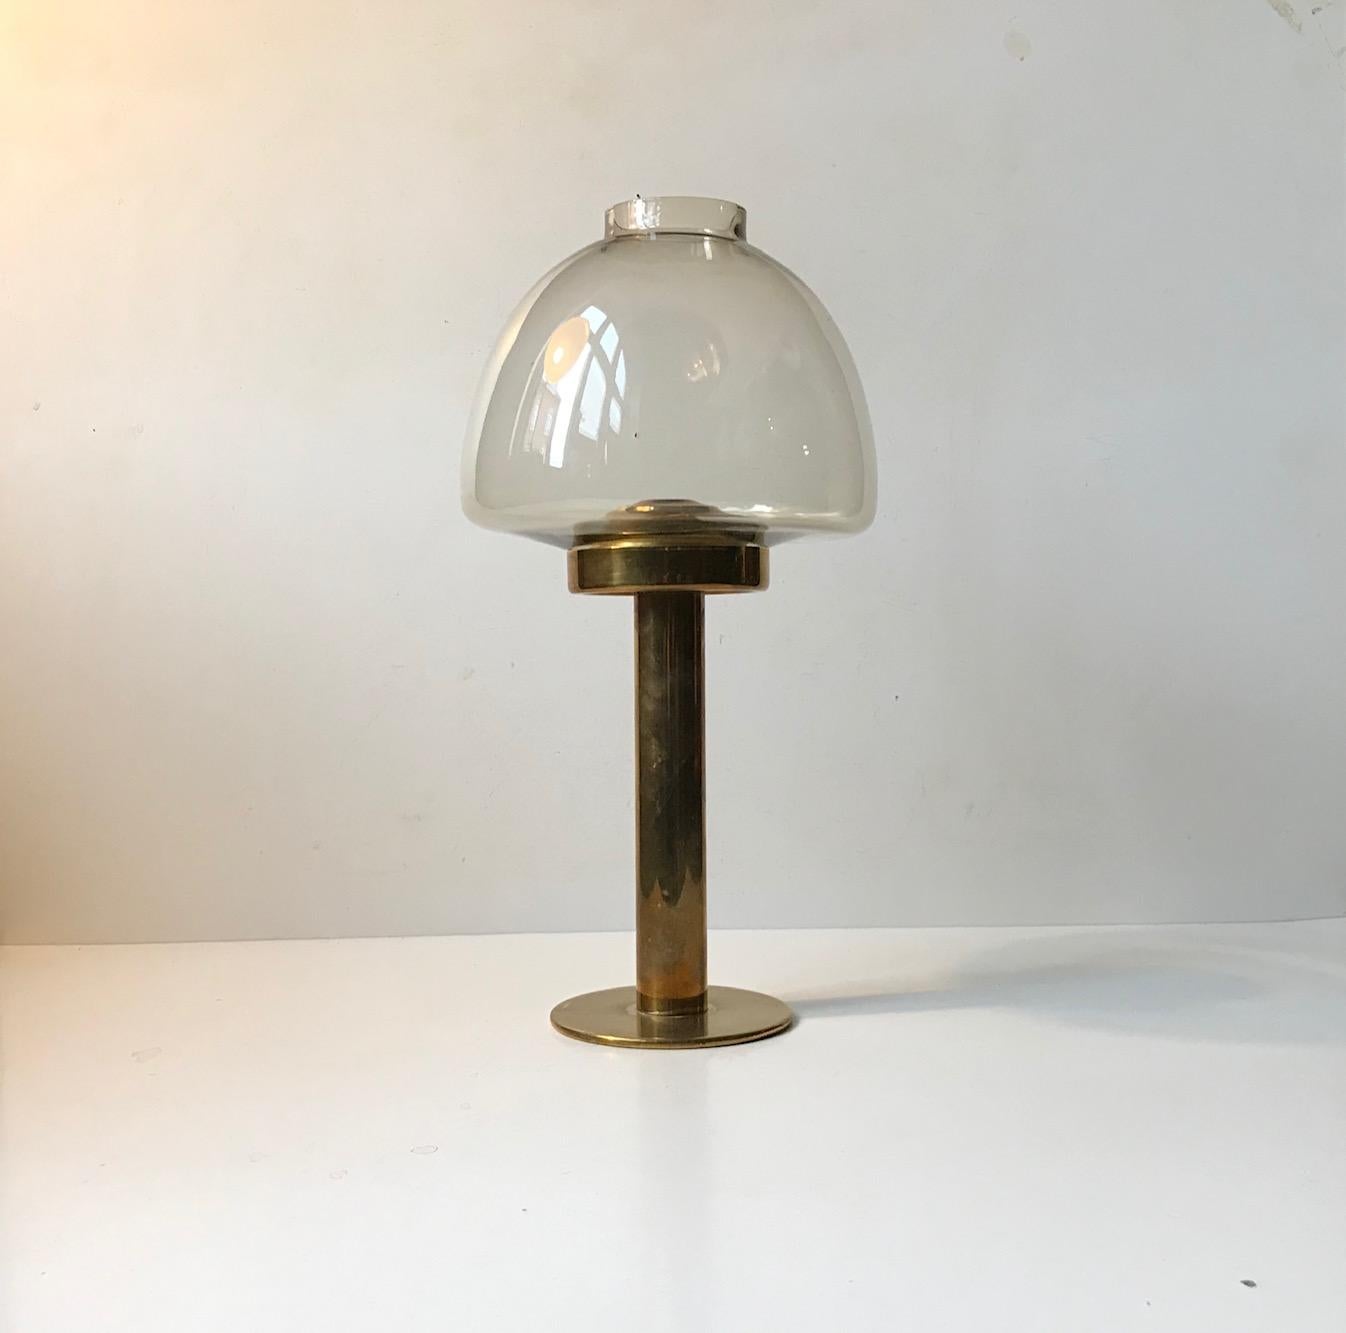 This candleholder Model L102/32 features a mouth-blown smoked hurricane glass shade and a brass base with a spring mechanism that pushes the candle upwards while burning. It was designed by Hans Agne Jakobsson and manufactured by his company